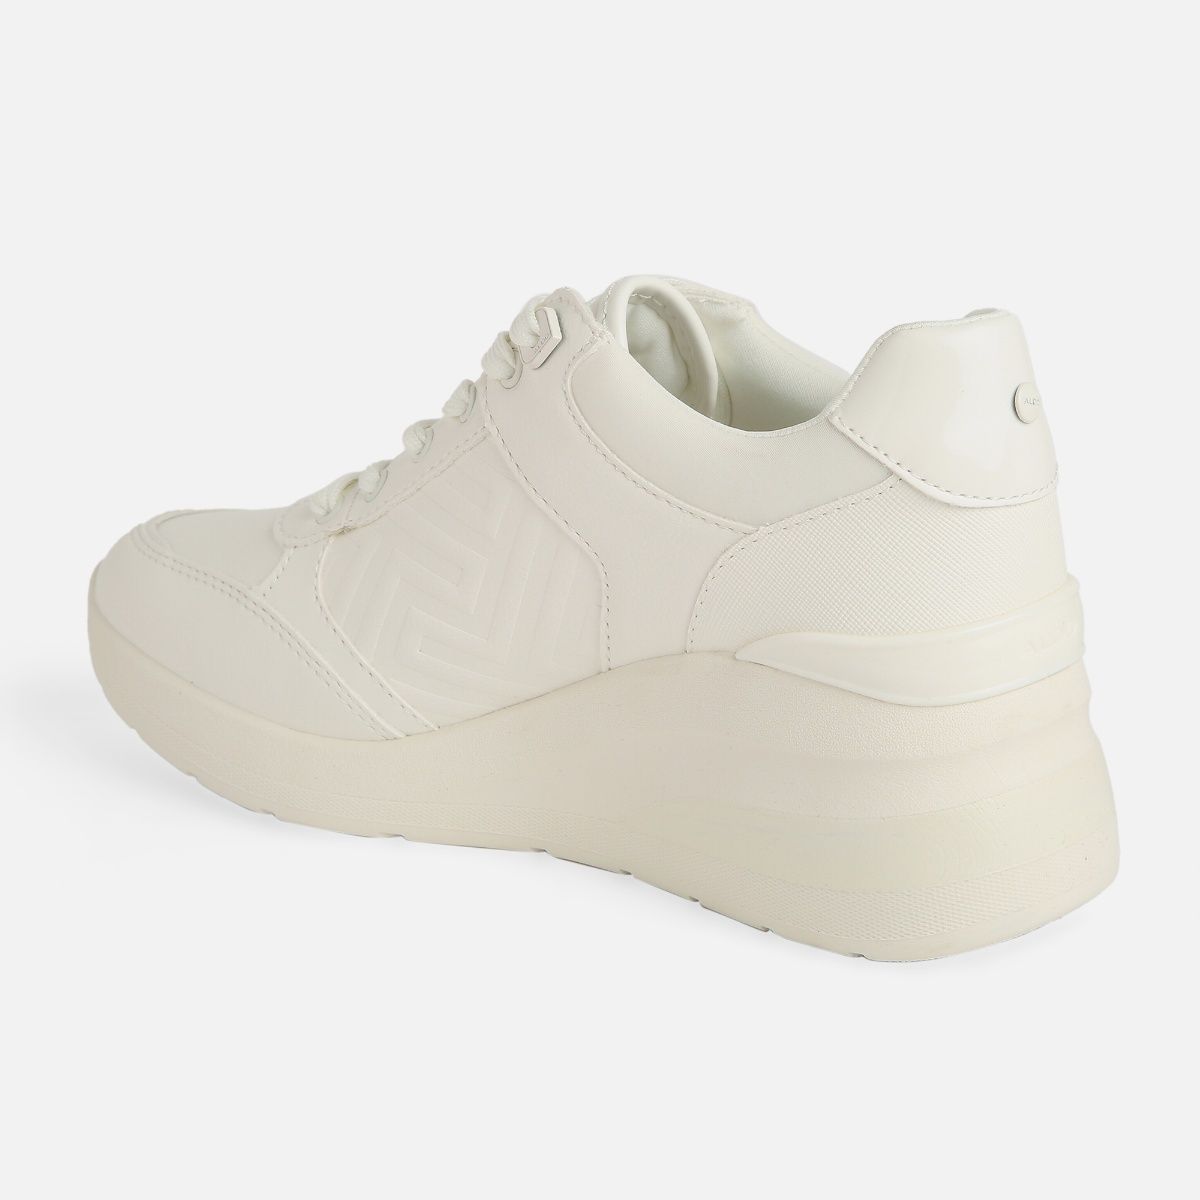 Aldo Iconistep Synthetic White Solid Sneakers: Buy Aldo Iconistep ...